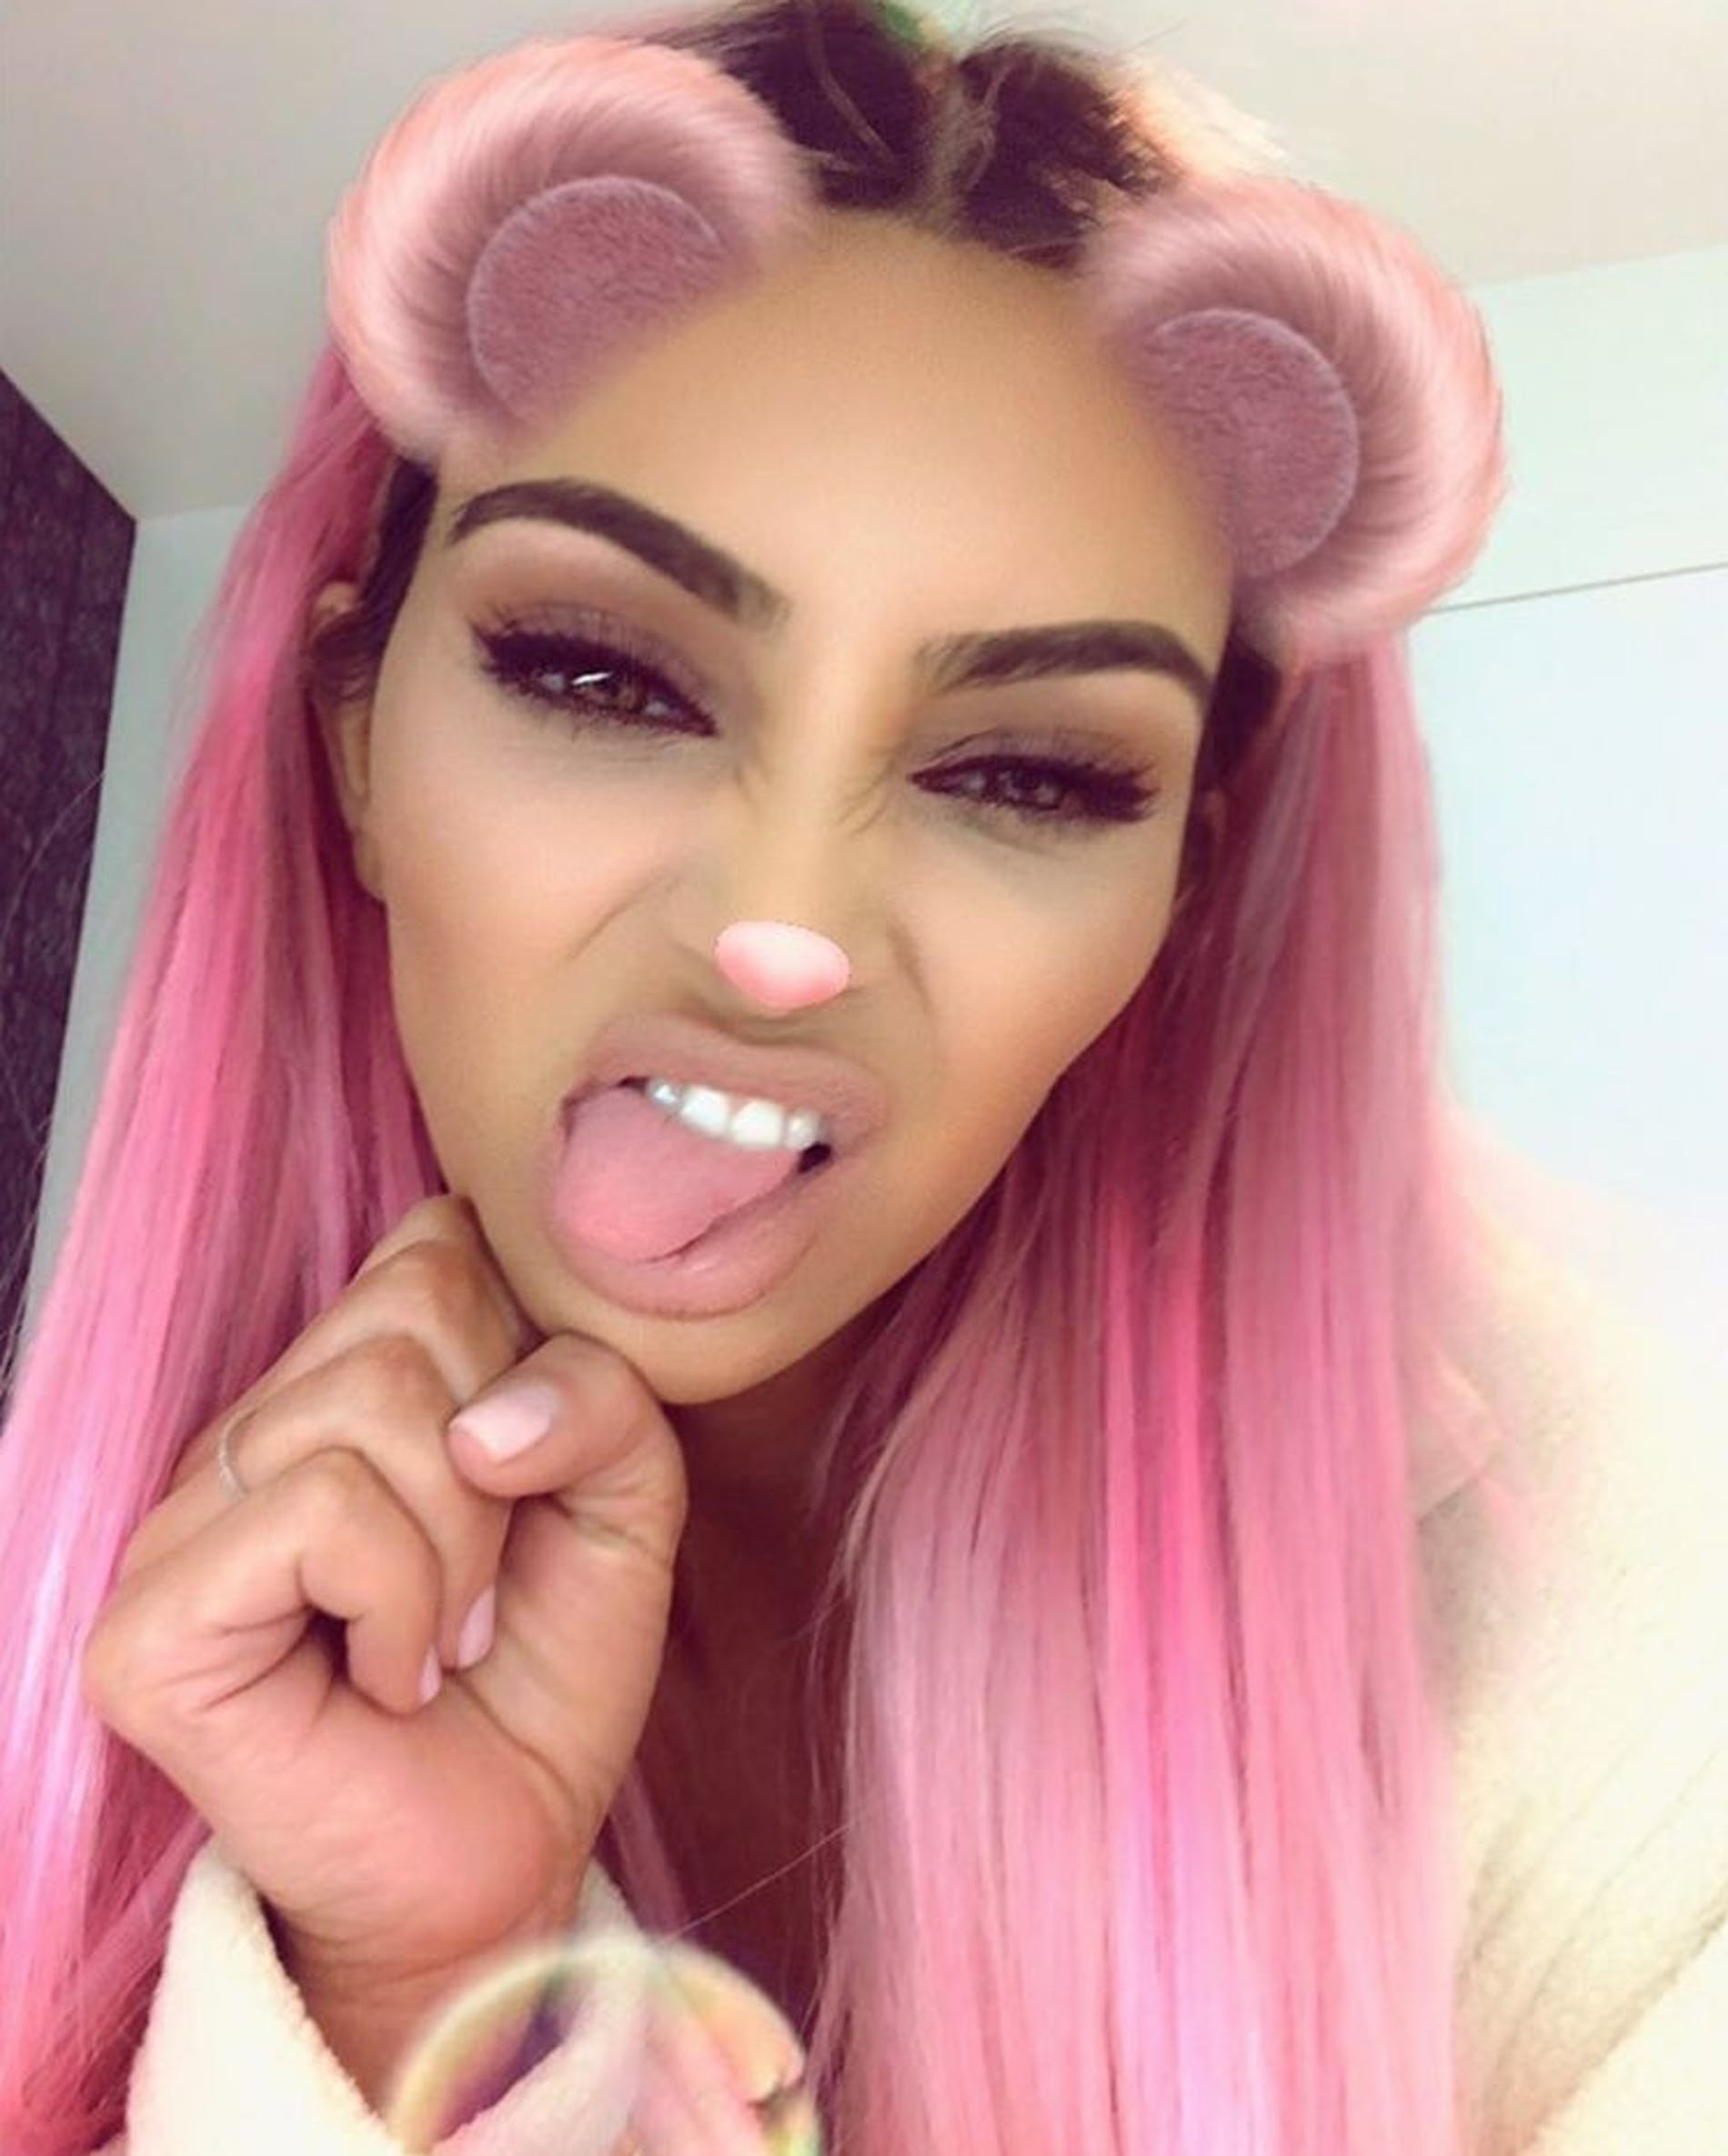 Kim Kardashian West’s new hair colour is striking pink and it’s definitely not a wig! - Smart Beauty Shop